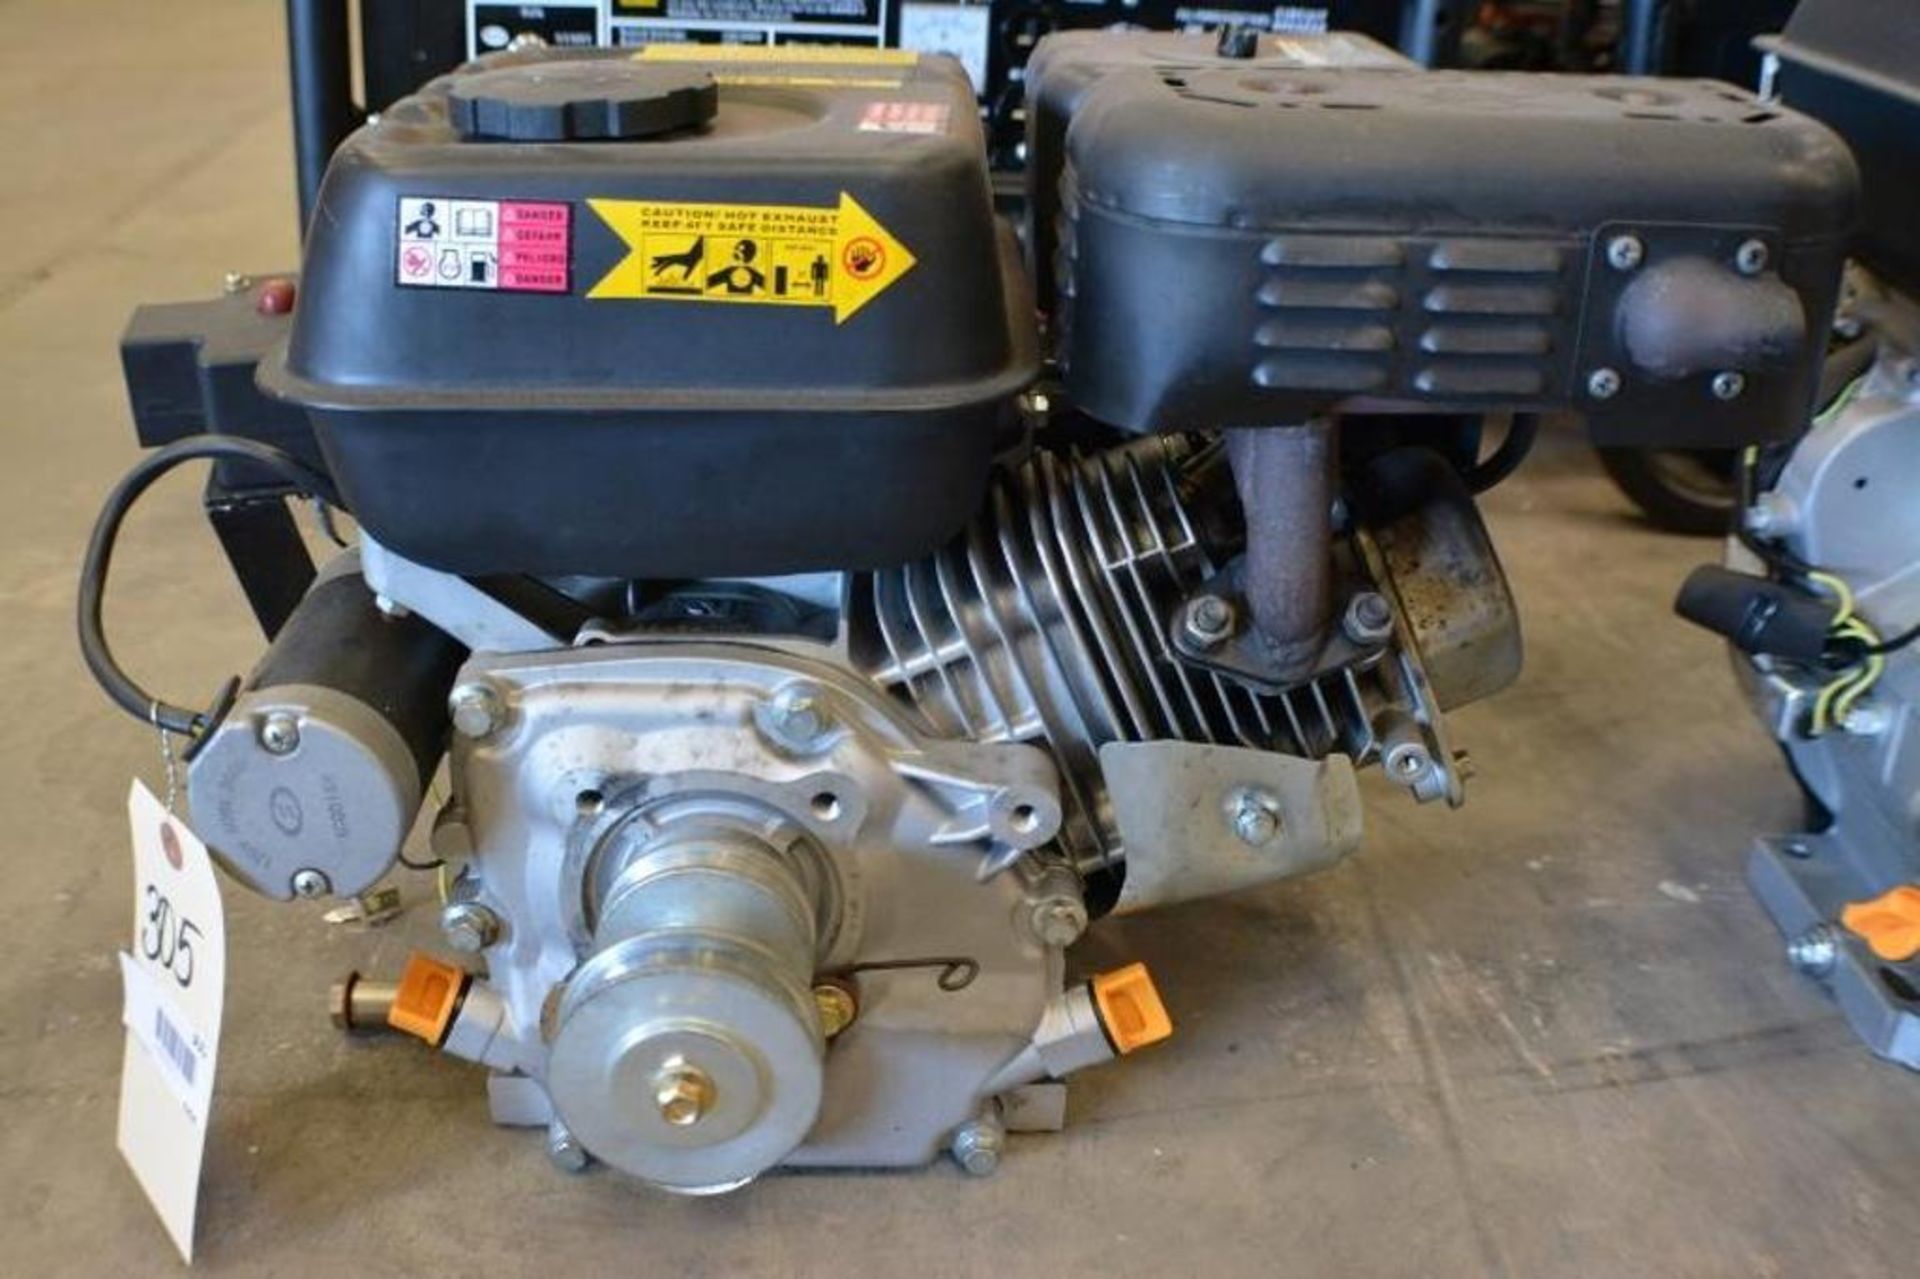 6.5HP Gasoline Engine 4 Stroke by Powerland Model 168F - Image 2 of 6